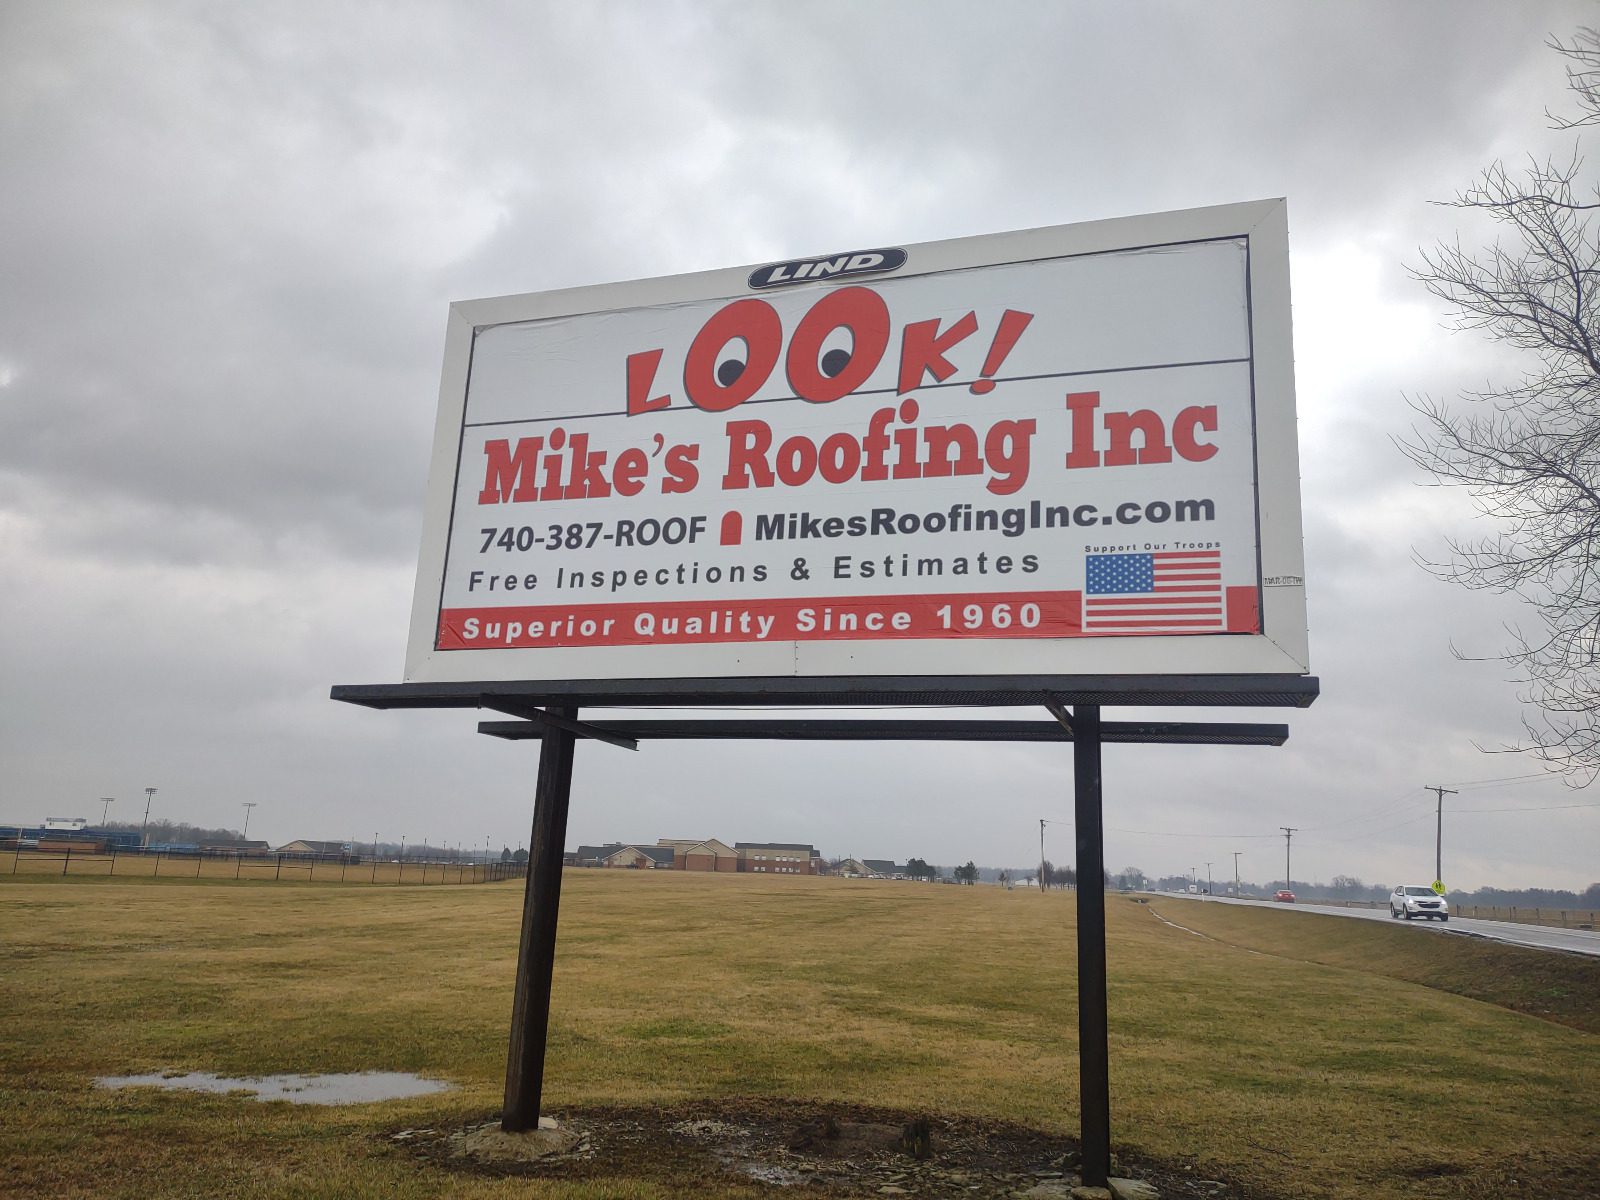 Mike's Roofing billboard, mikes roofing, roof marion, roof estimates, roof inspections